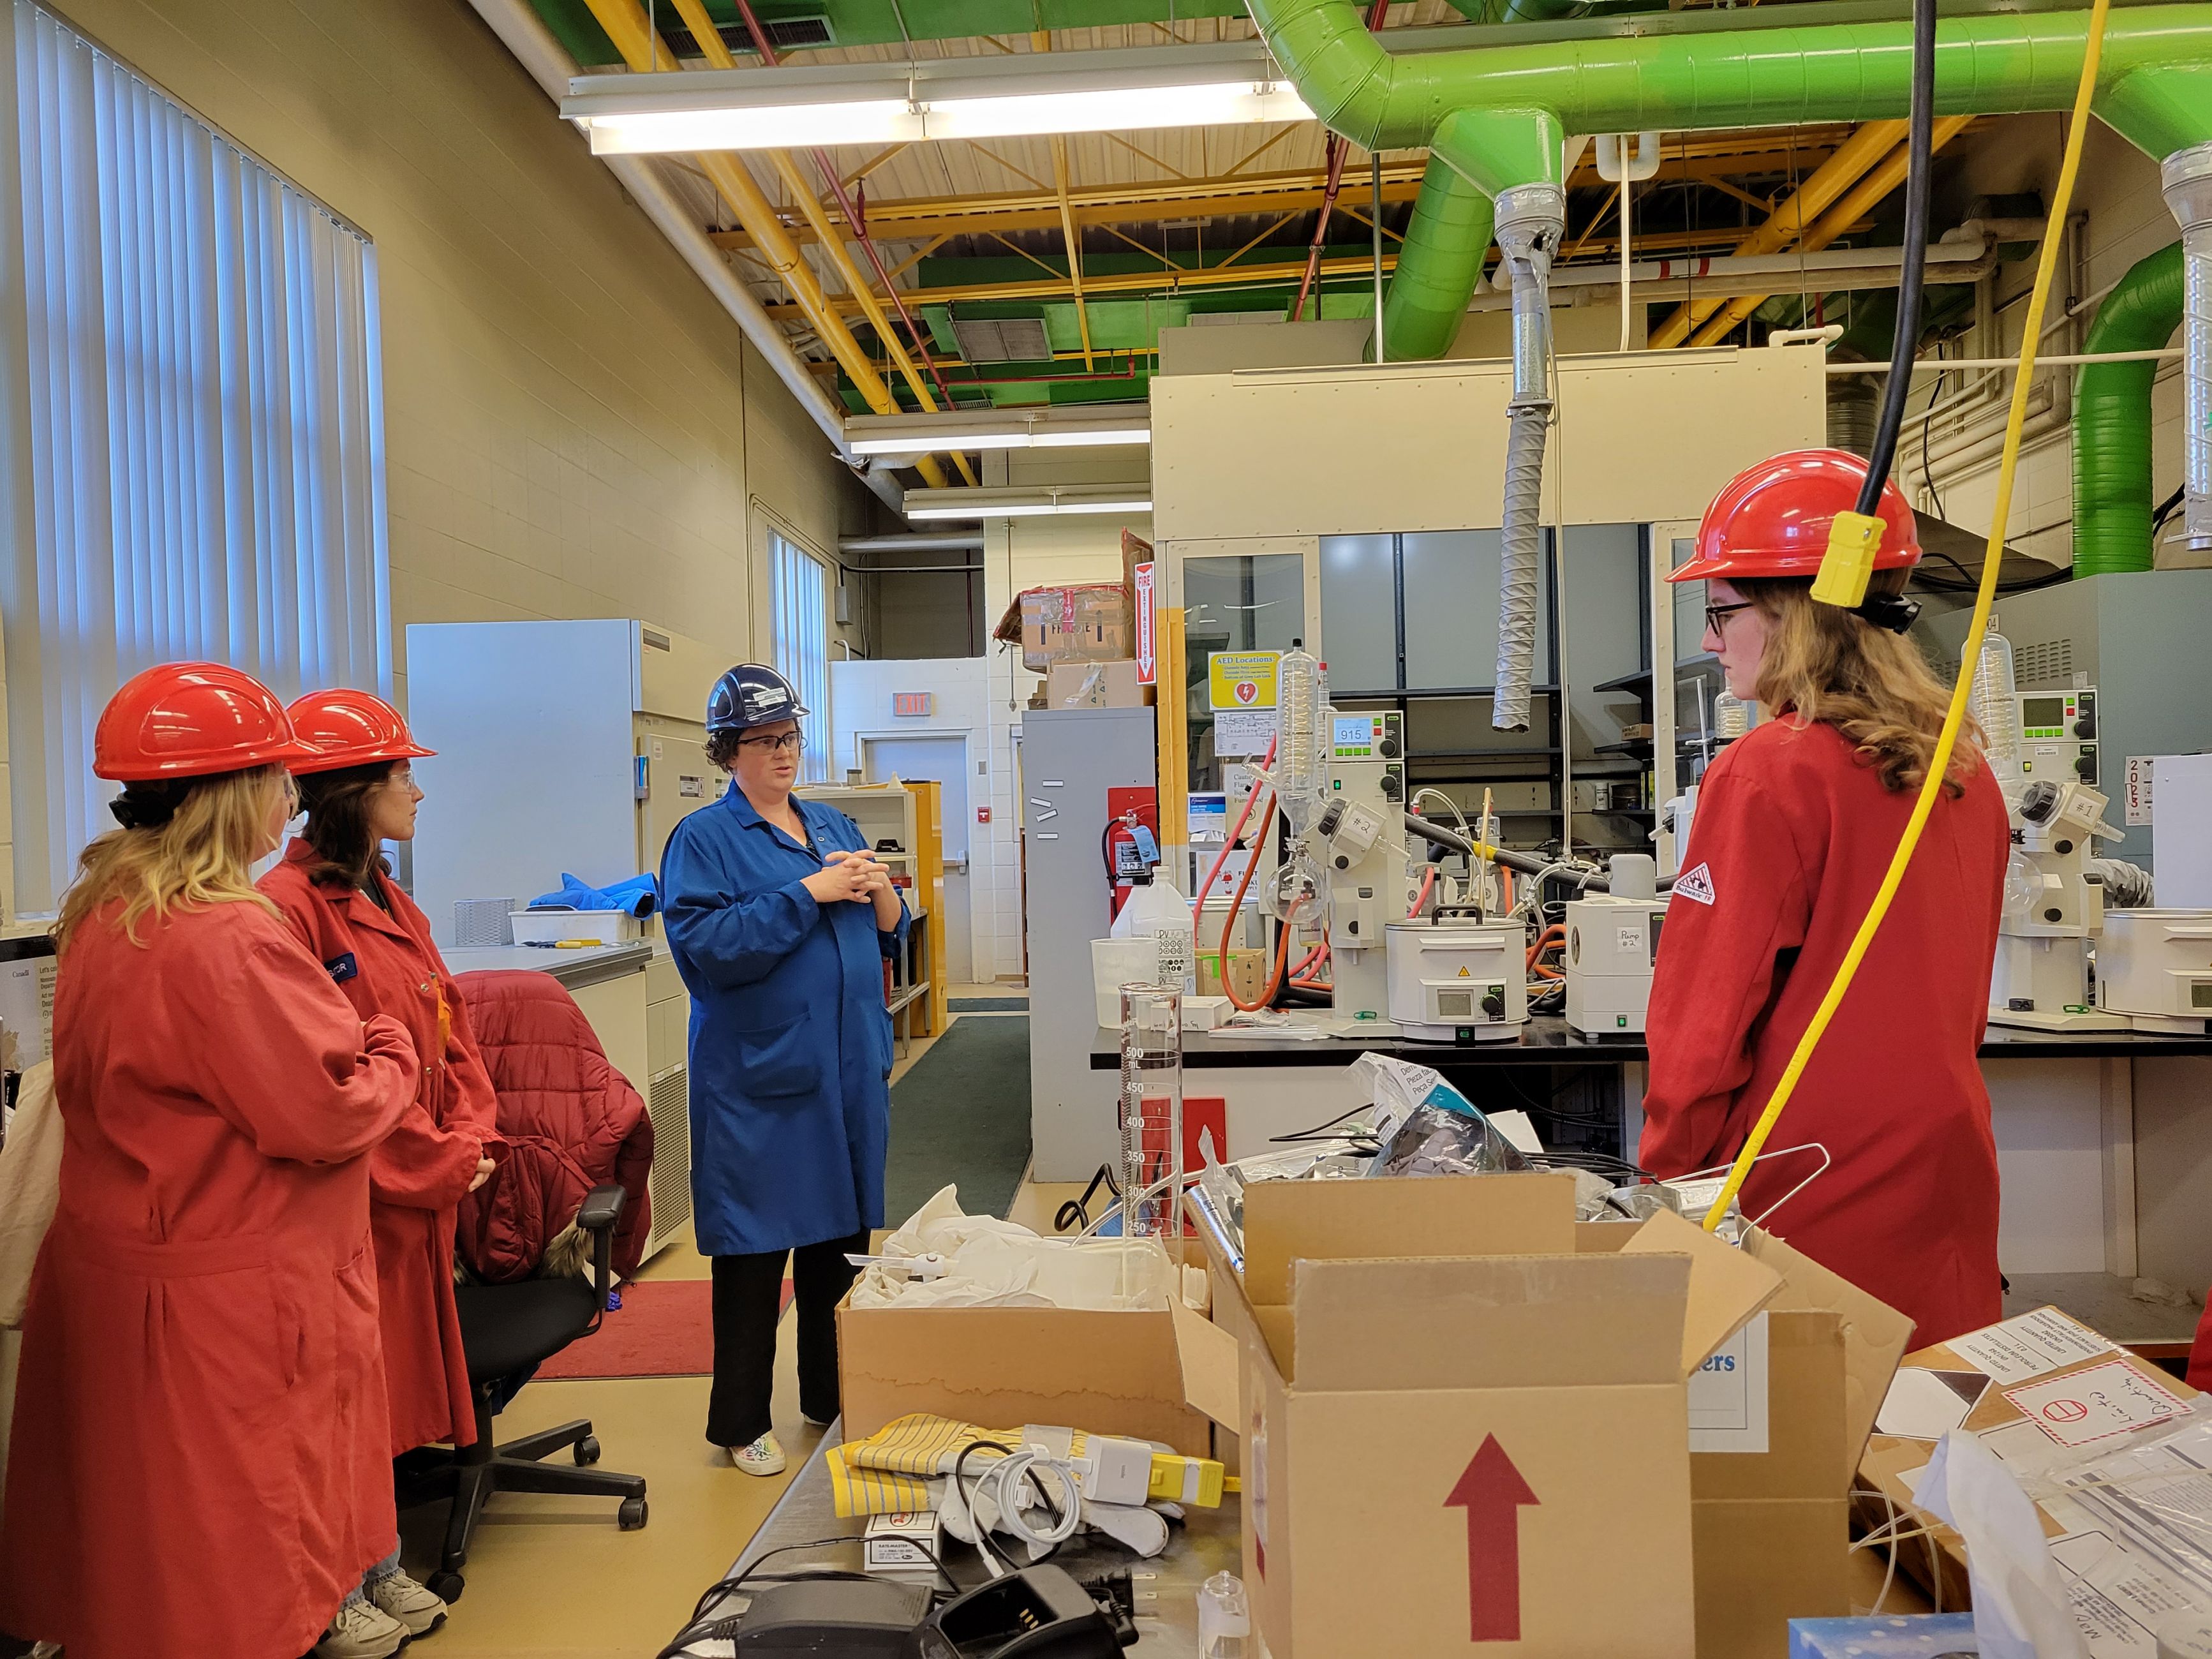 NRCan staff visiting the CANMET-Devon facility